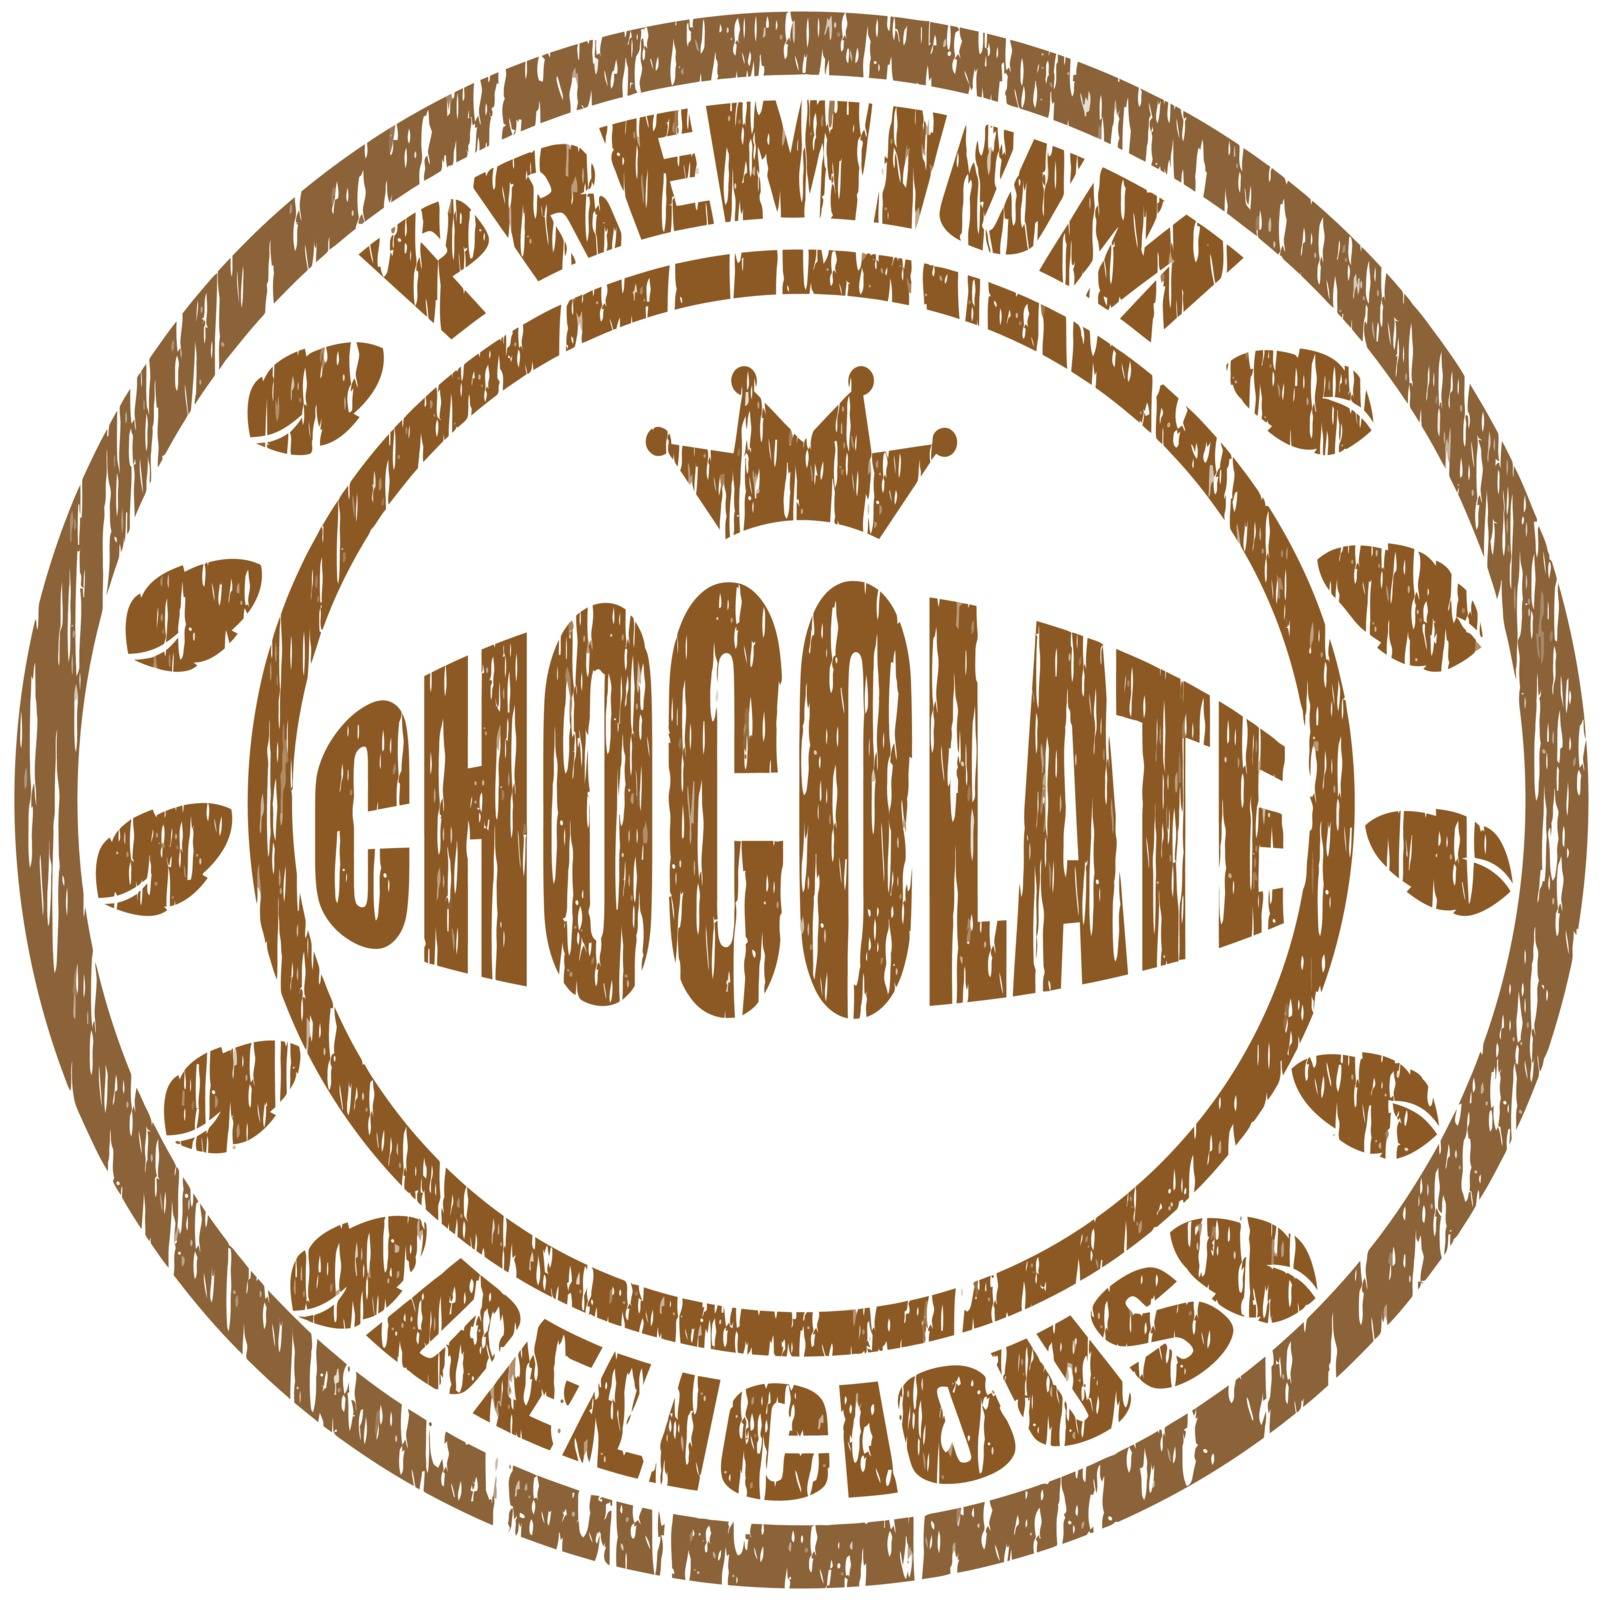 Stamp with text premium chocolate inside, vector illustration